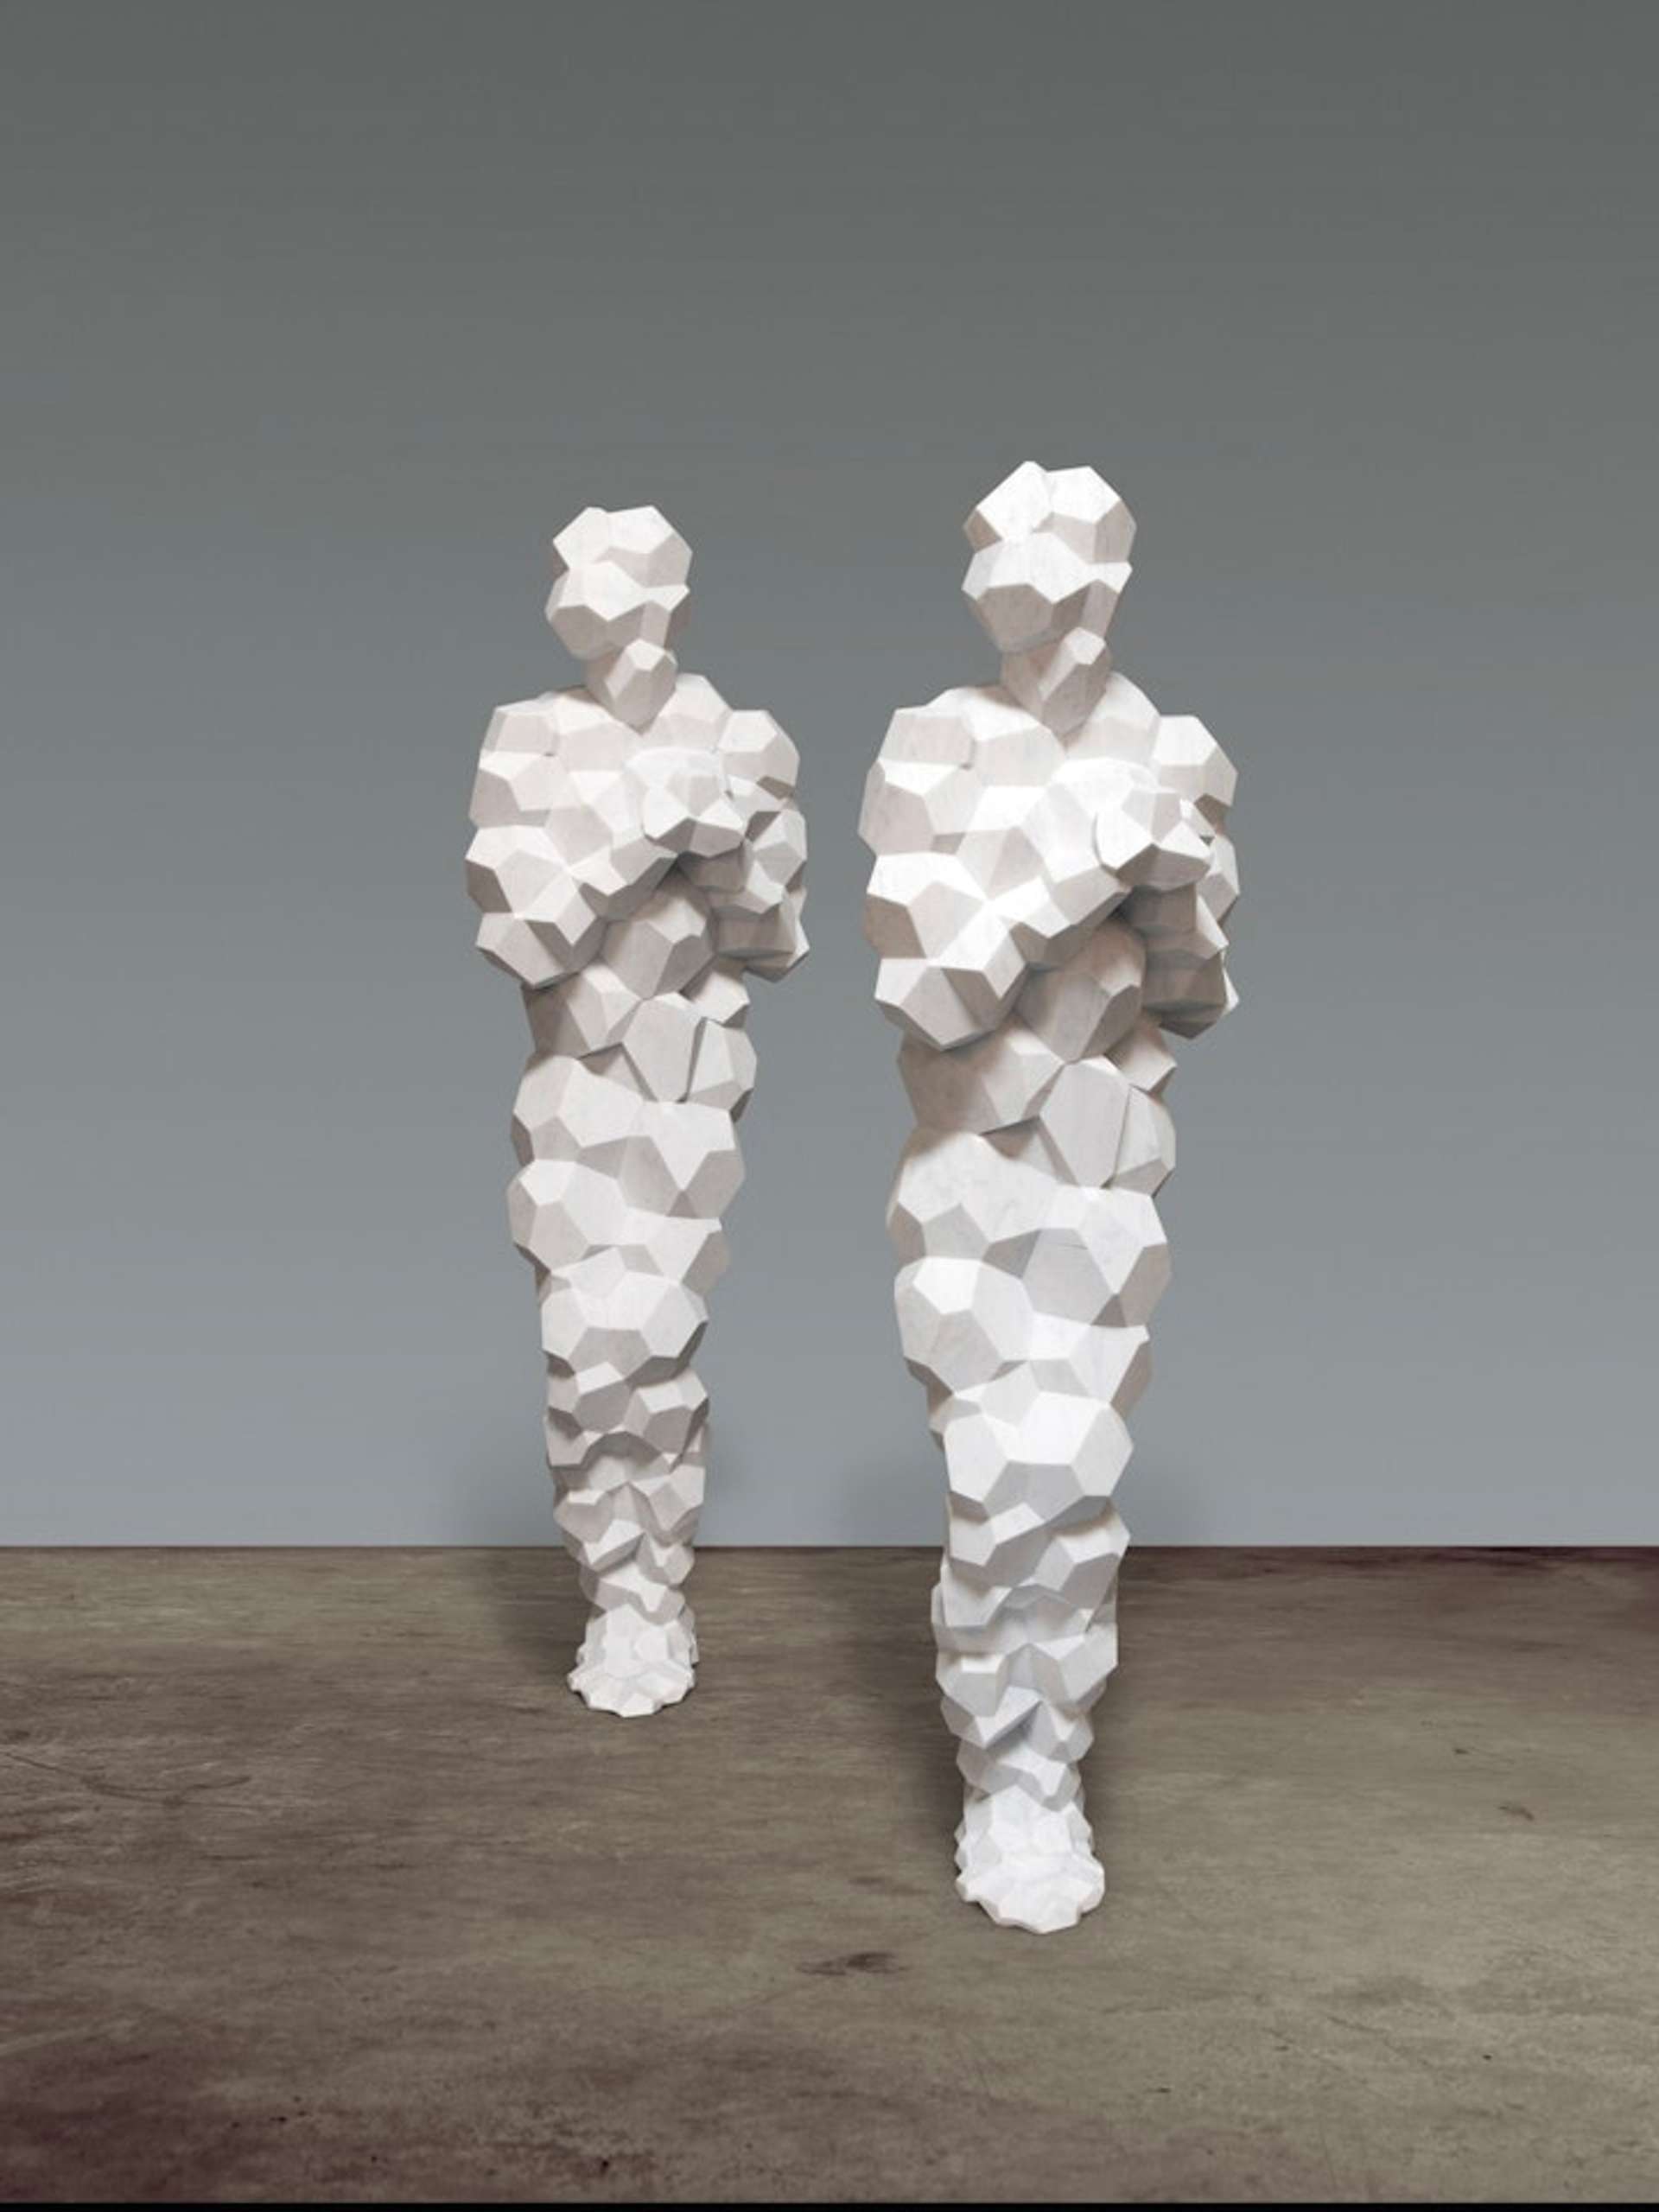 Two freestanding life-sized marble sculptures are captured in an unoccupied gallery, positioned on a concrete floor. The sculptures, crafted from marble, aim to portray the essence of the human form without any distinctive features. The marble material lends a textured surface to the figures, which are arranged in a staggered manner beside each other.